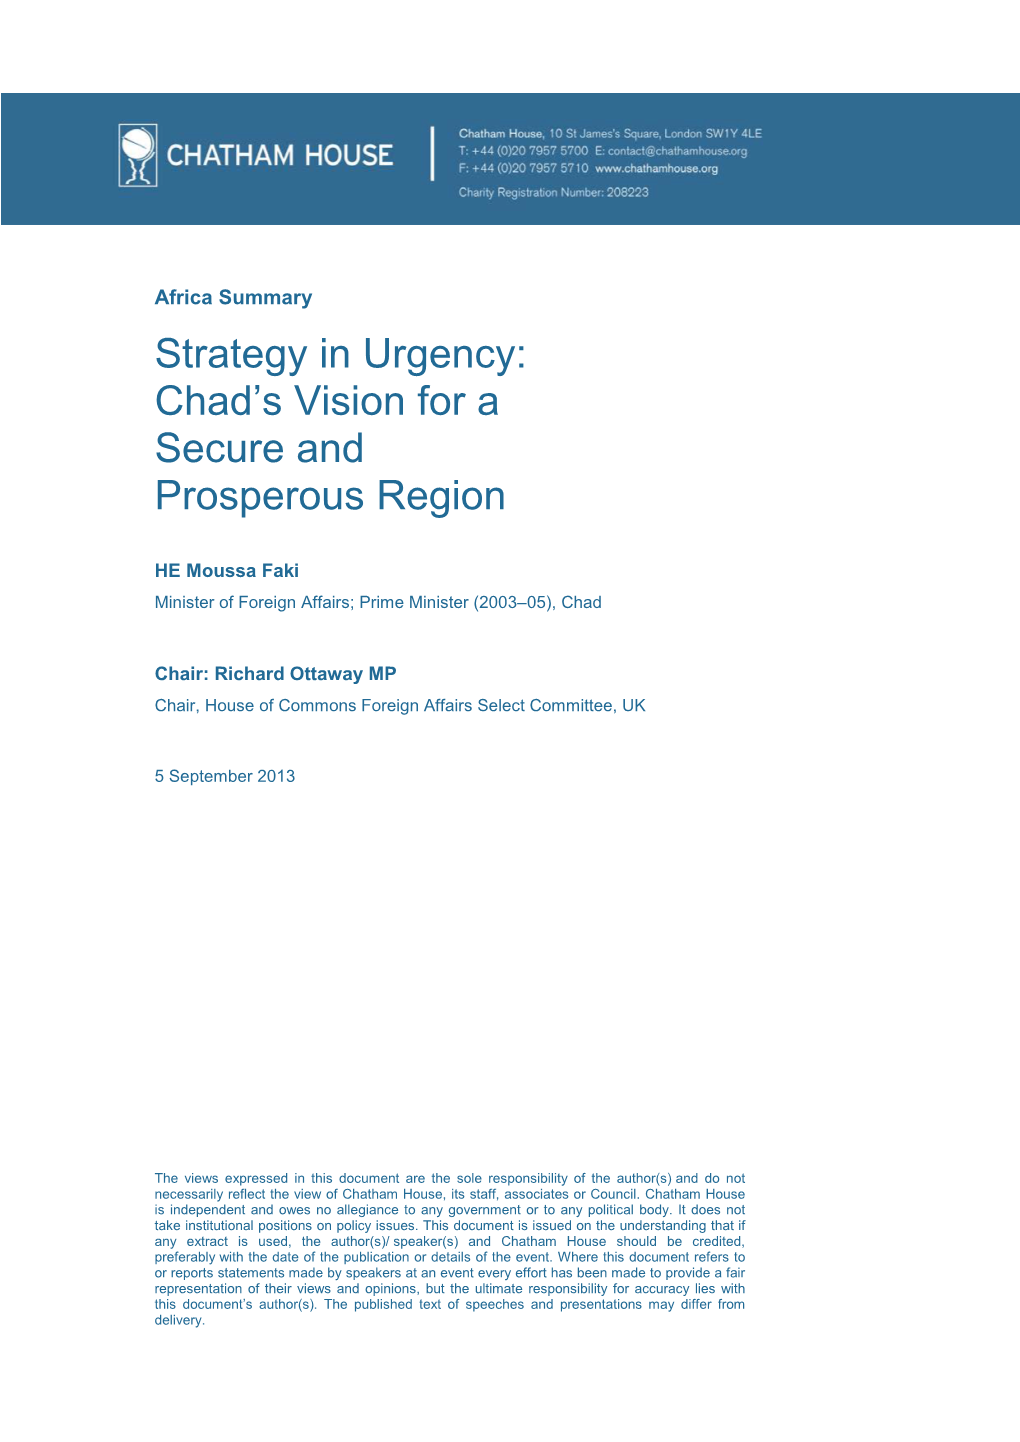 Chad's Vision for a Secure and Prosperous Region